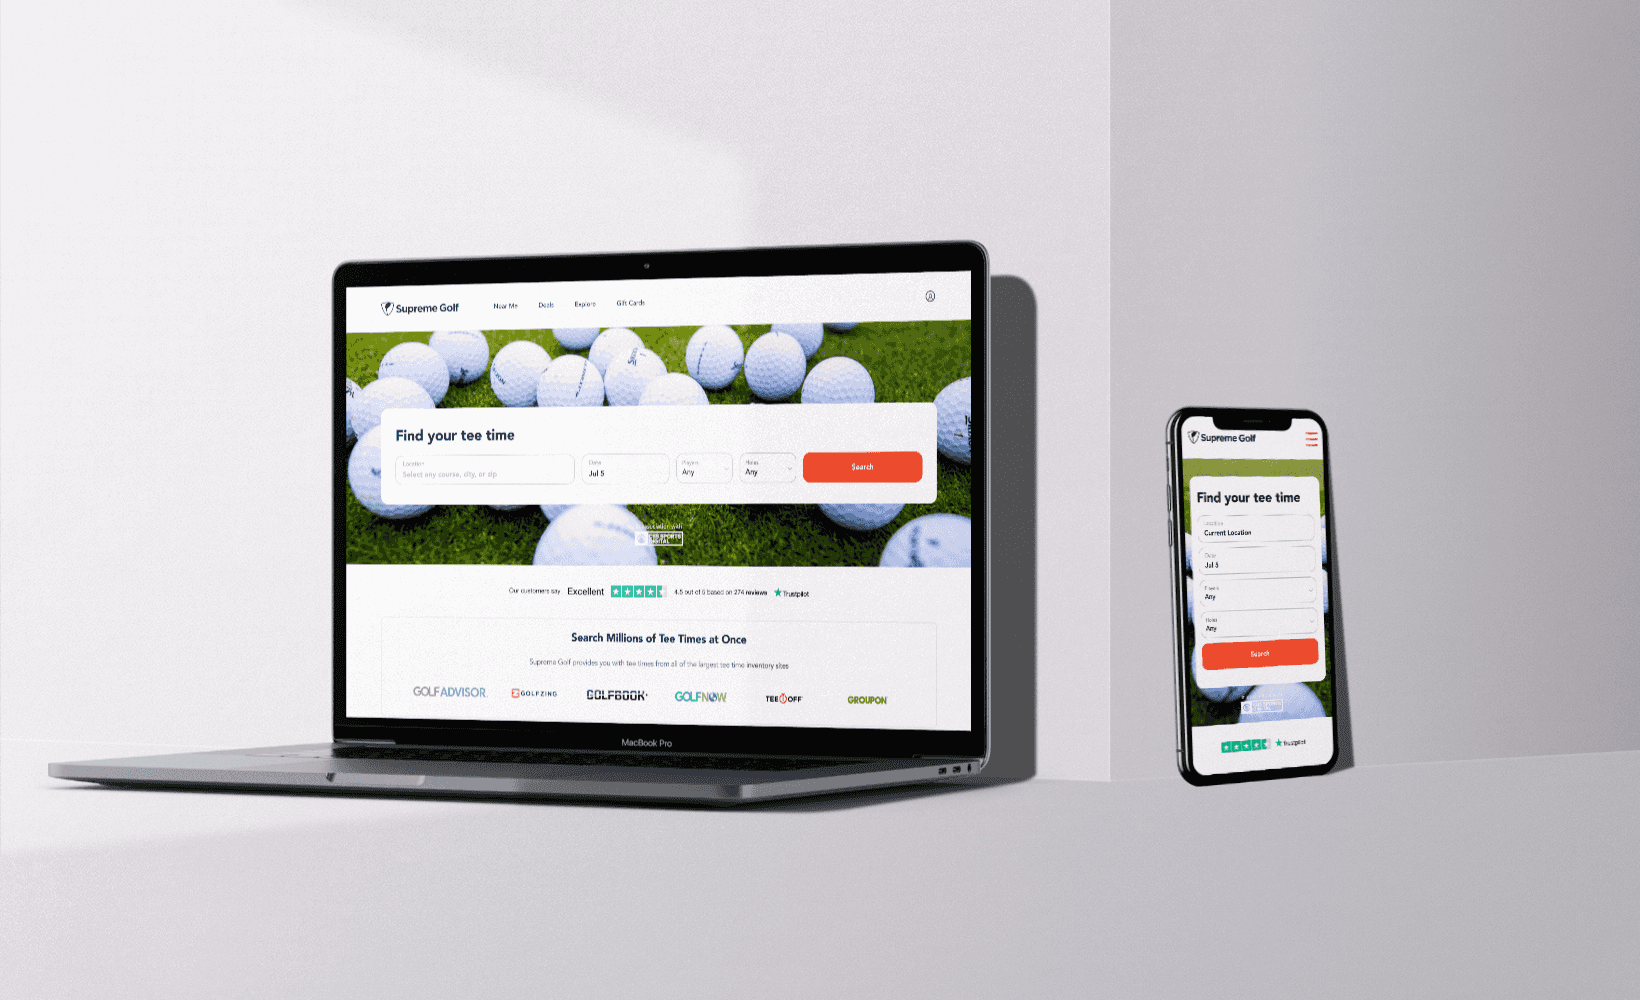 Supreme Golf is a technology firm that has created the KAYAK of golf tee times. Built more features on the website and APIs, managed bug fixes and UI changes as well.